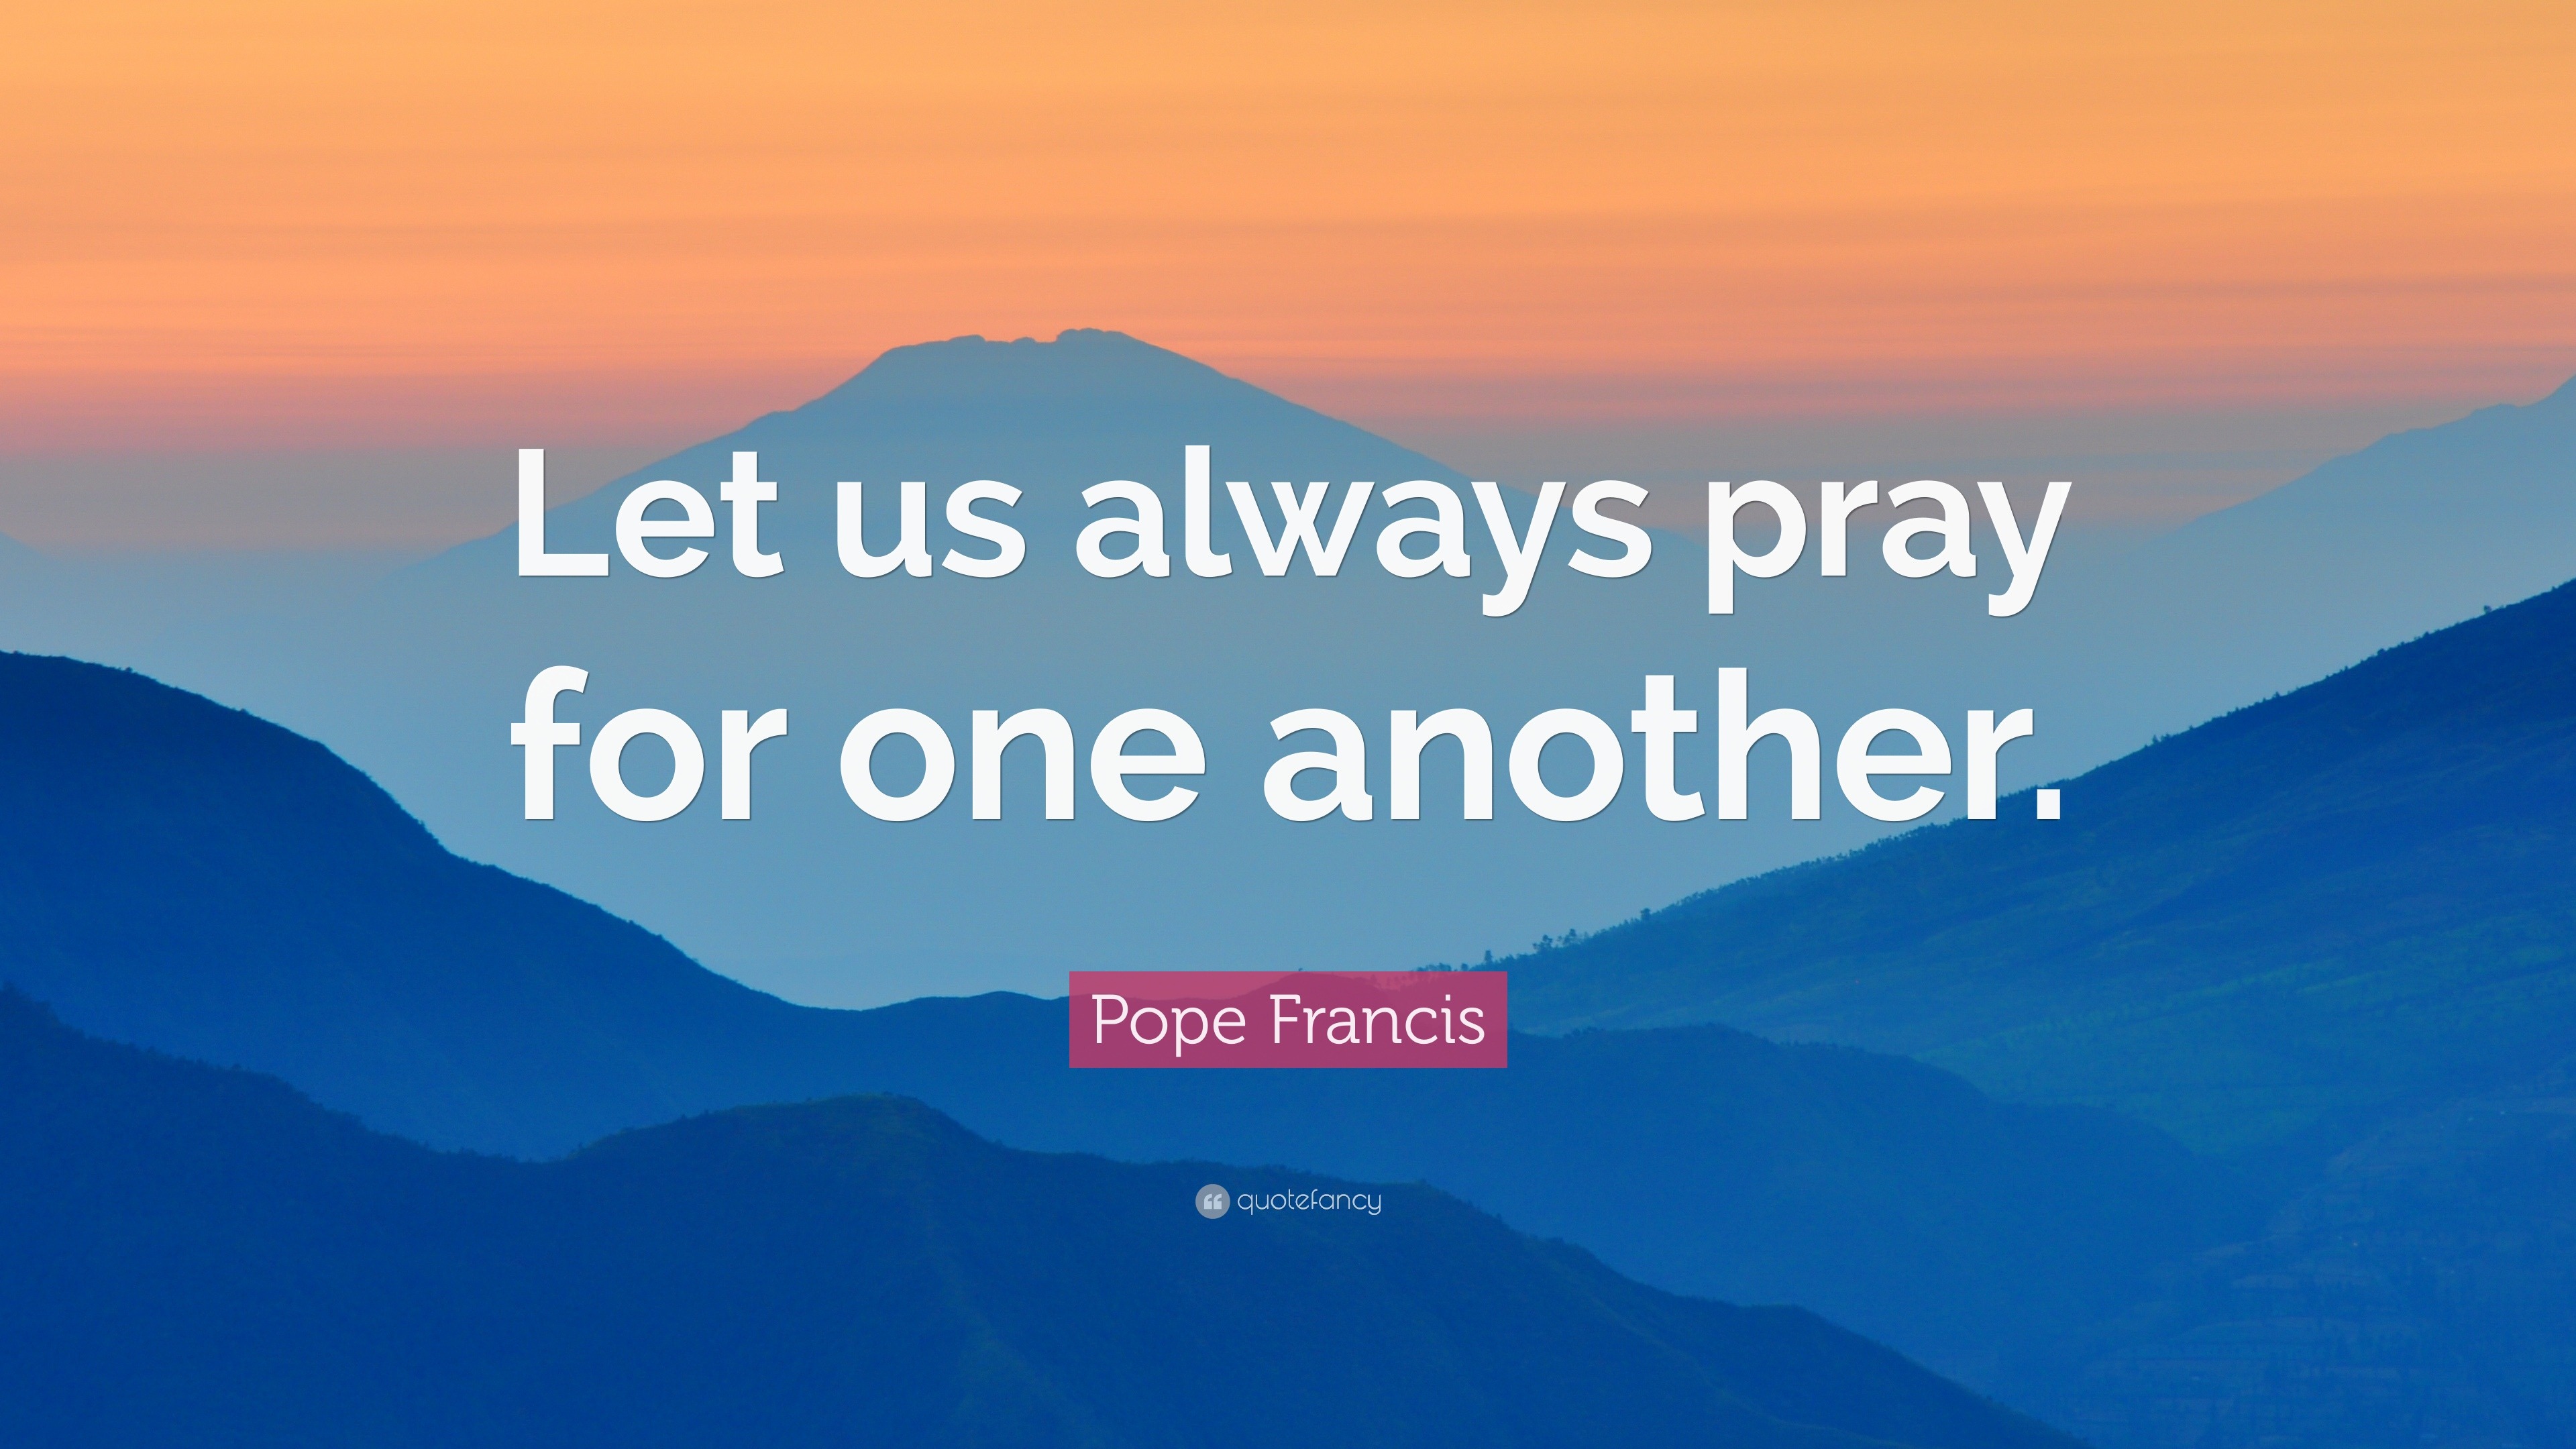 Pope Francis Quote: “Let us always pray for one another.” (12